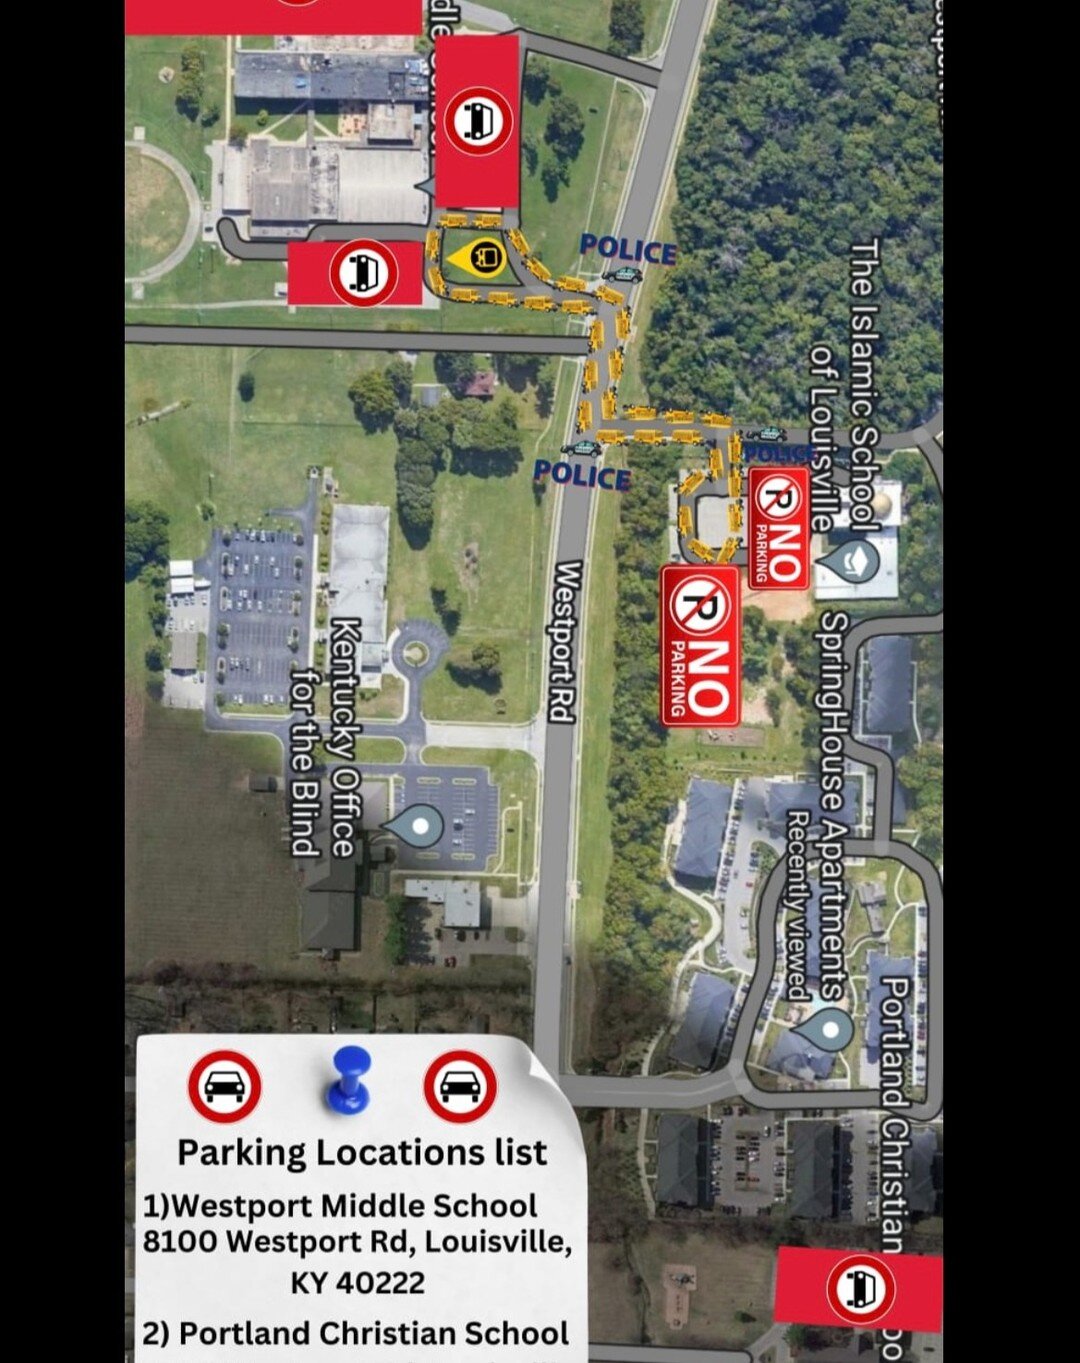 The MCC is incredibly excited to welcome guests for our Festival tomorrow! Here are some helpful tips/reminders as well as a diagram of the parking setup for tomorrow. 

Please be safe, mindful, and considerate!

🚗 Parking is set up at Westport Midd